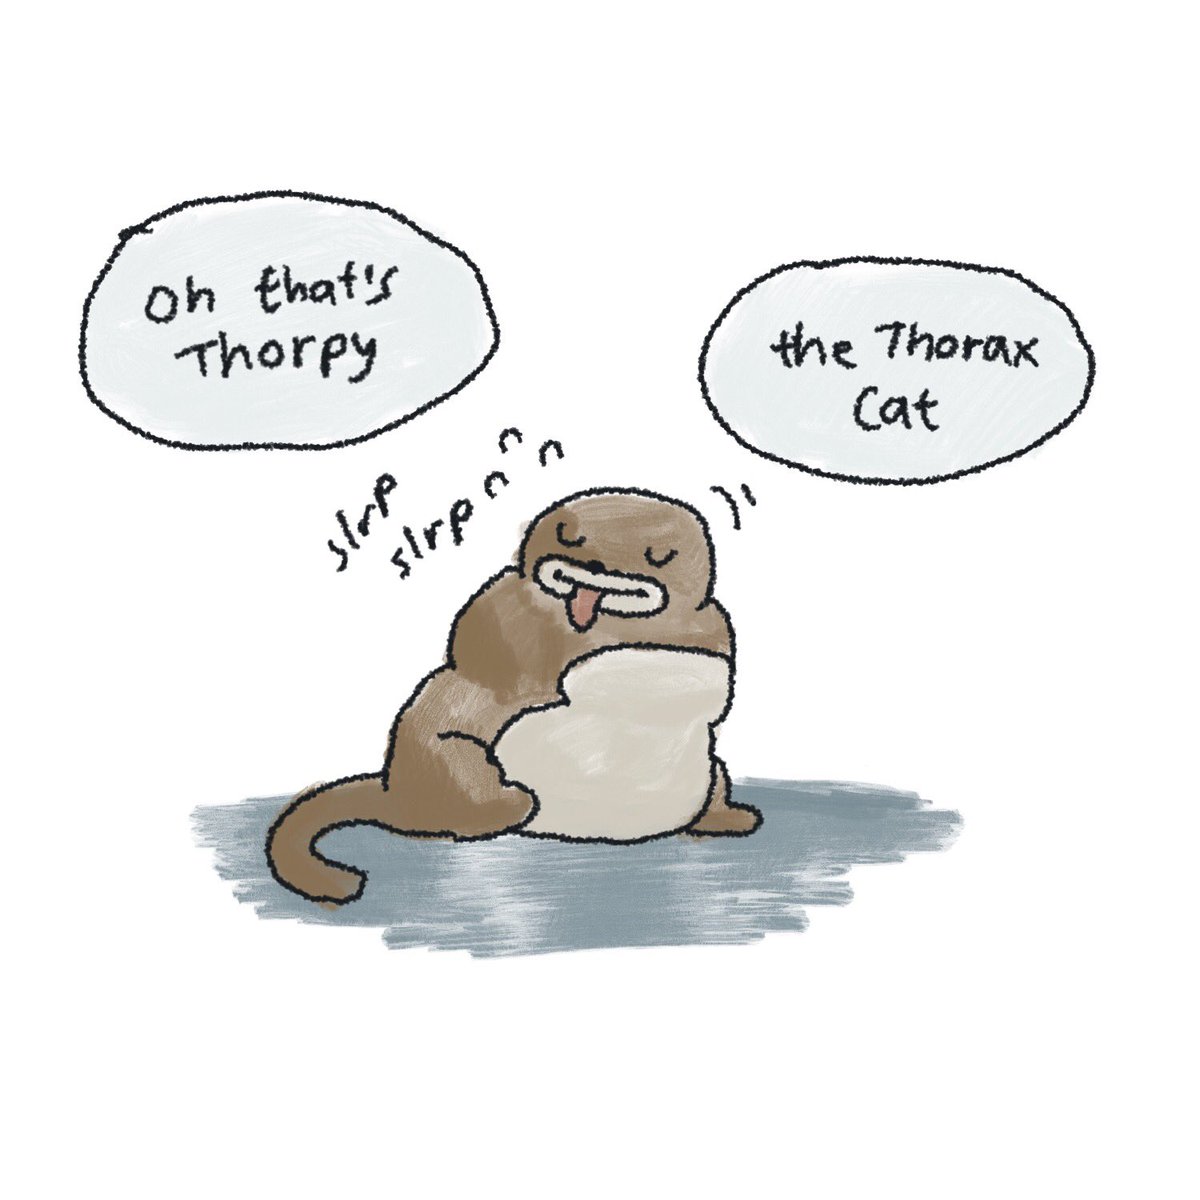 Thorpy the Thorax Cat 